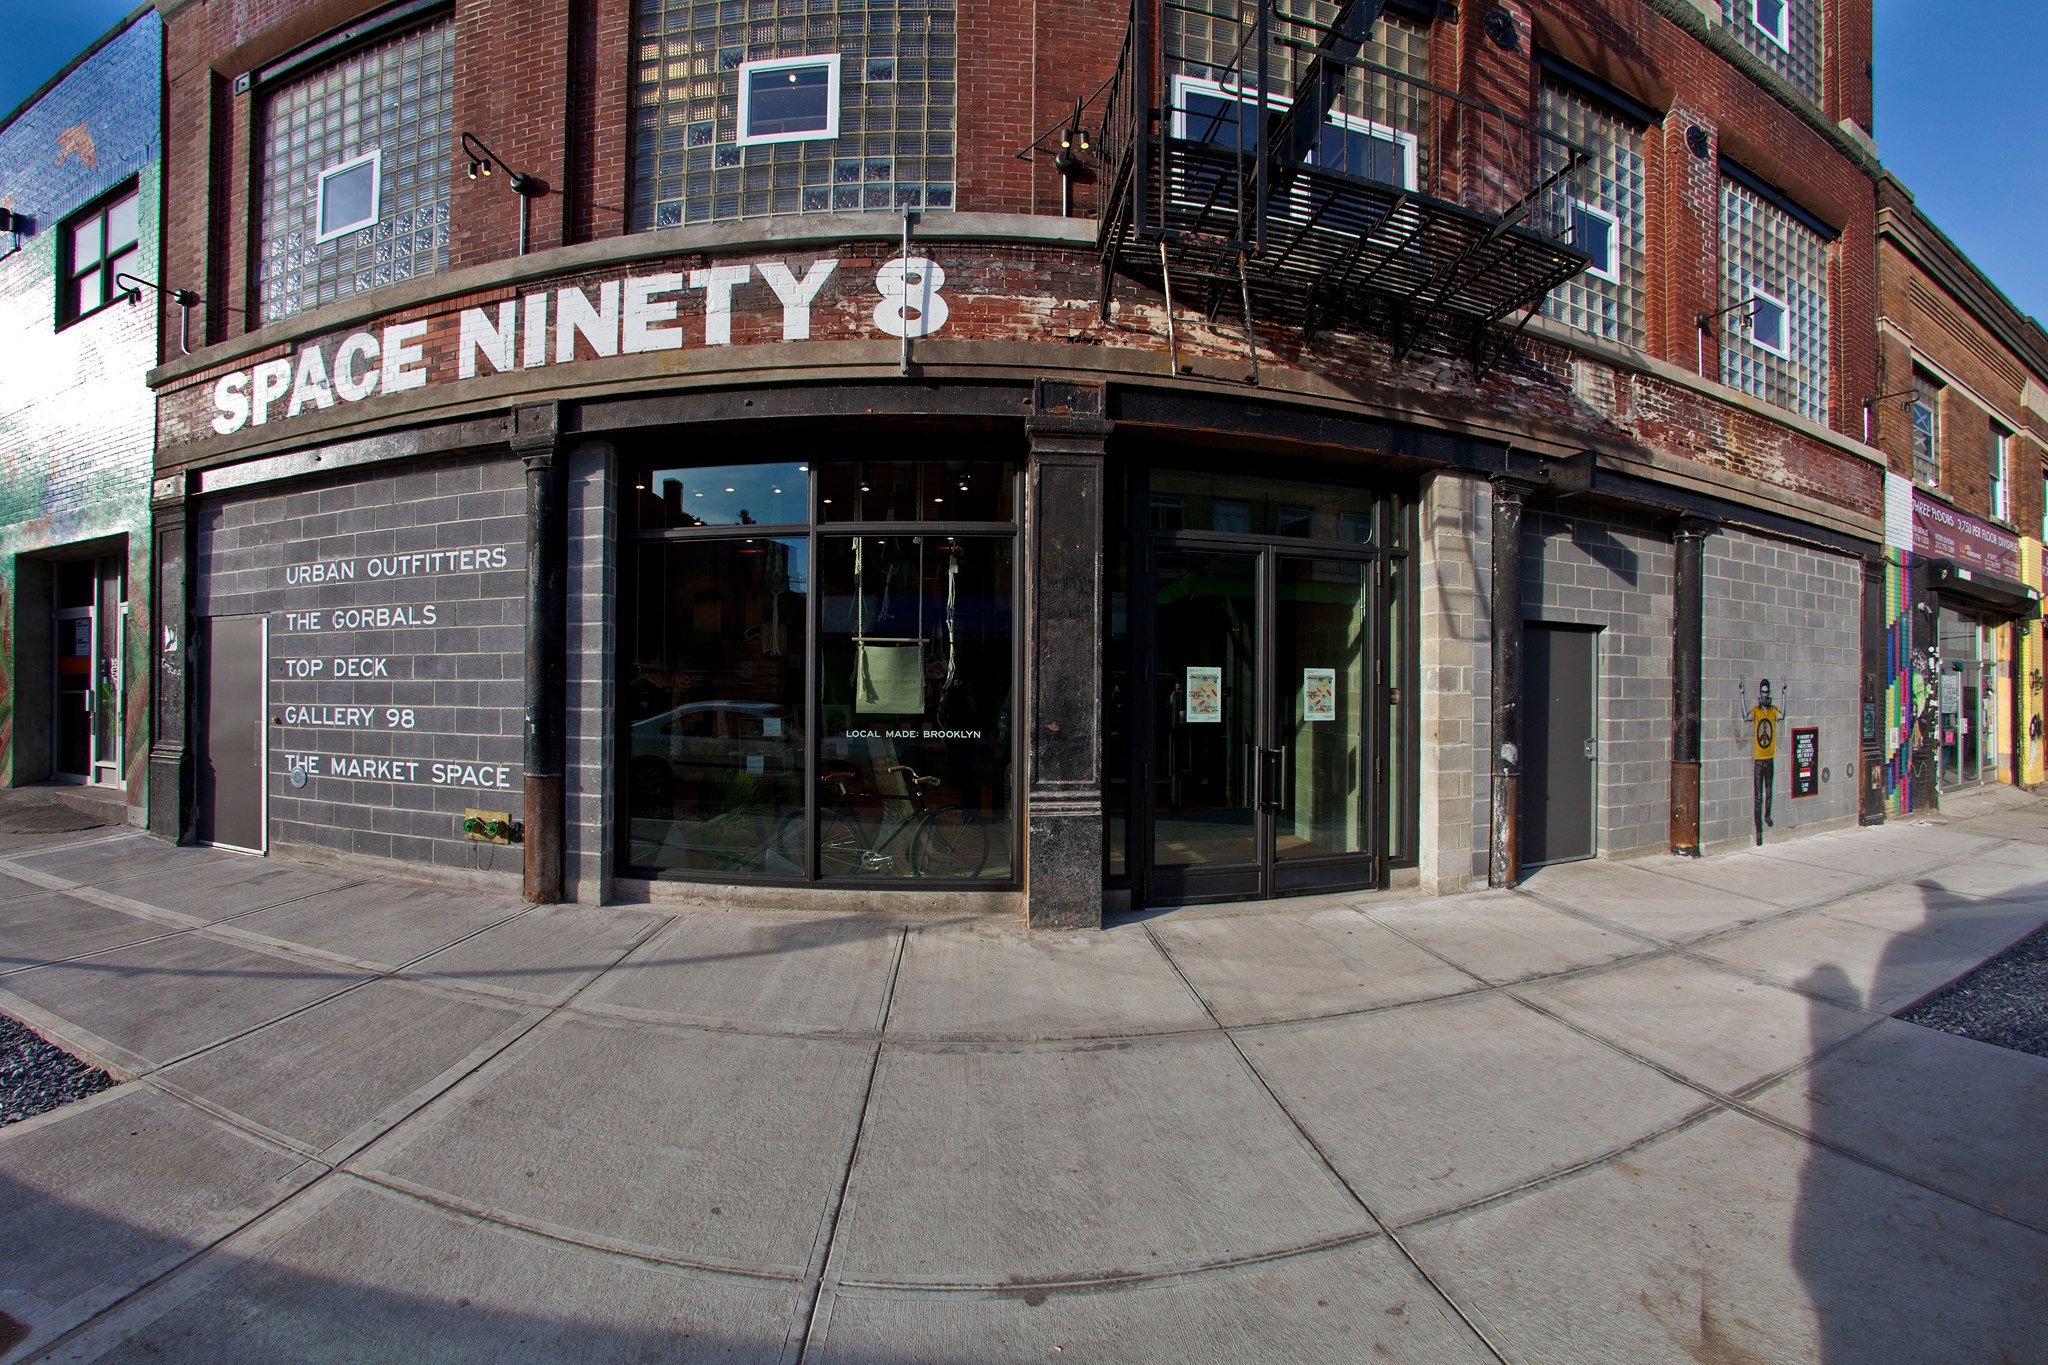 Space Ninety 8 by Urban Outfitters in New York